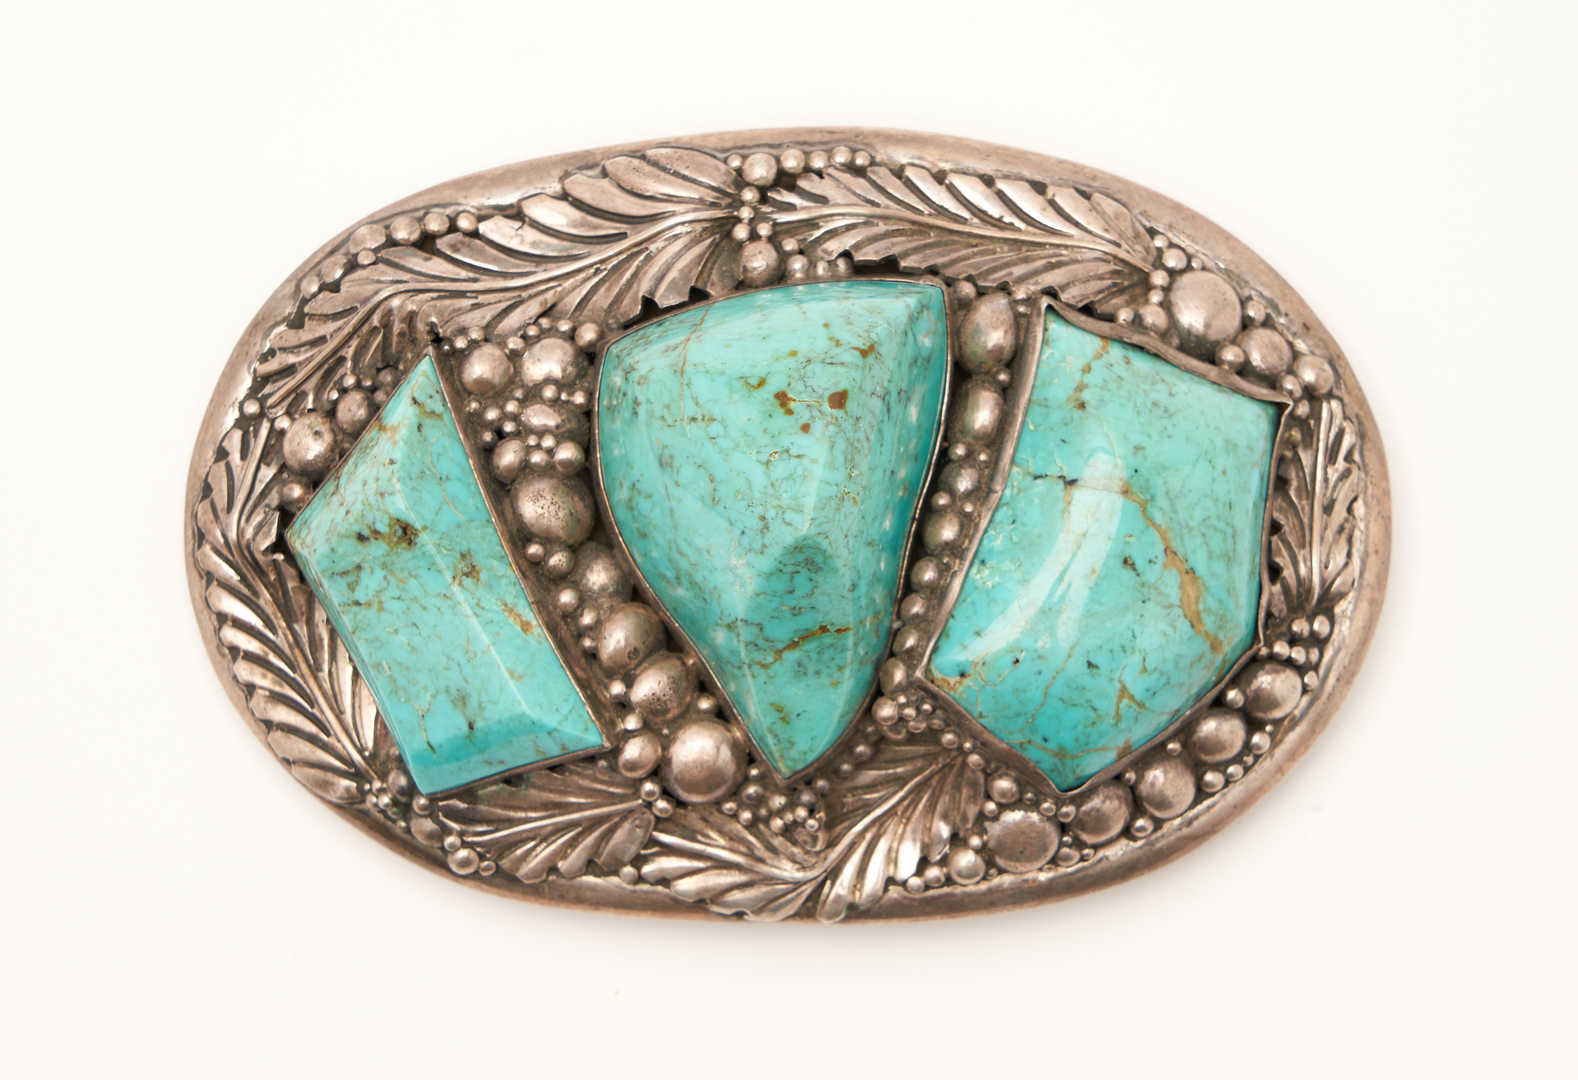 Lot 616: 3 Pcs. Southwest Native American Turquoise & Silver Jewelry